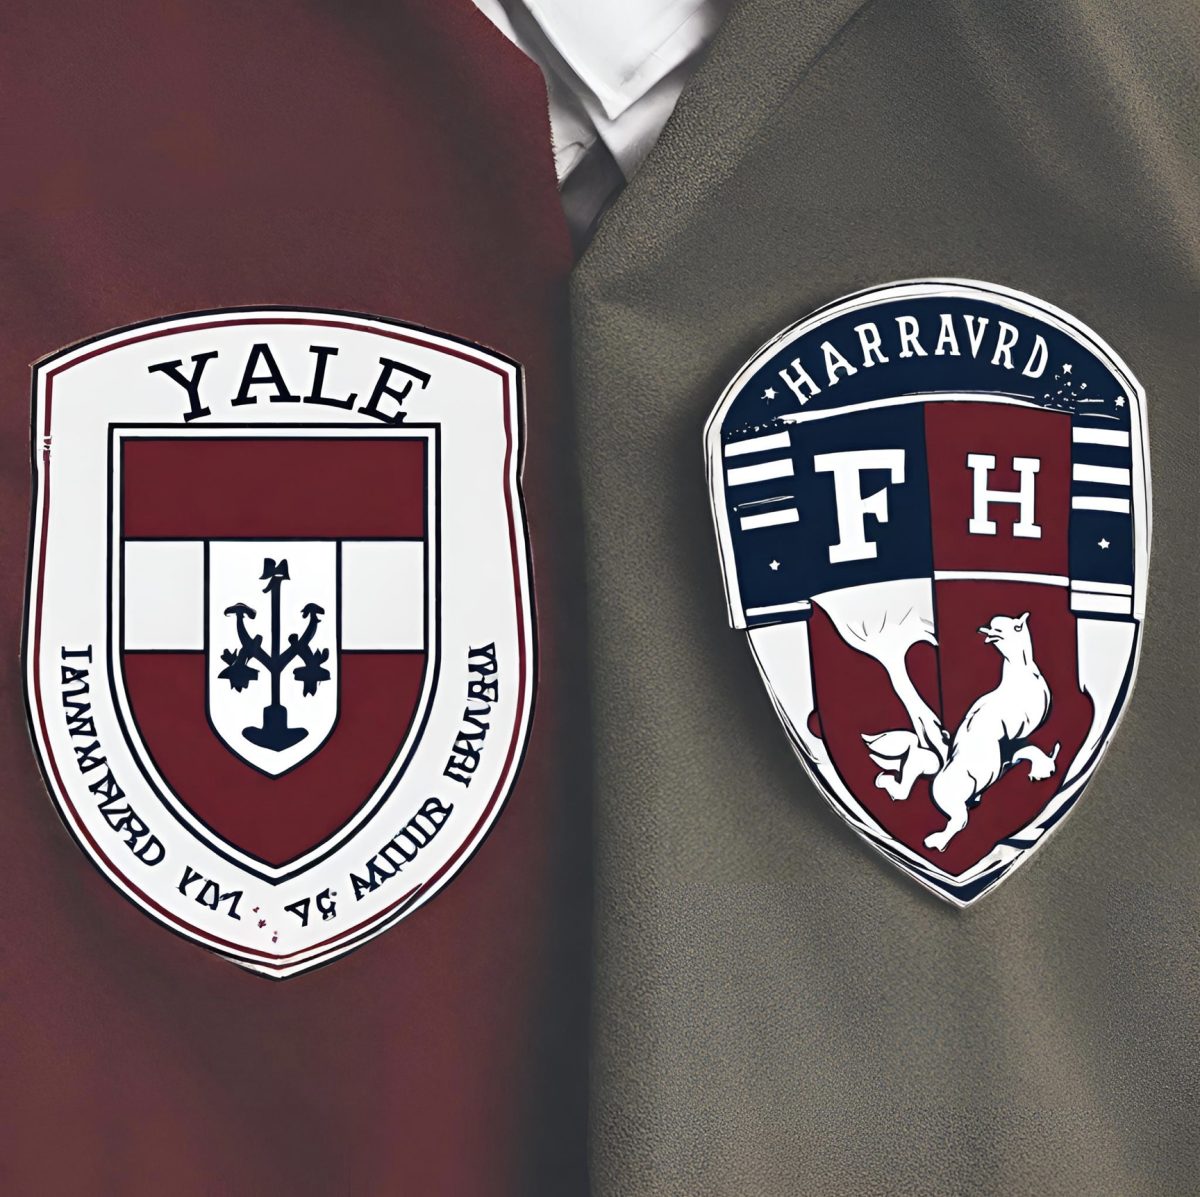 Yale+and+Harvard+emblems+beside+each+other+on+school+uniform.+